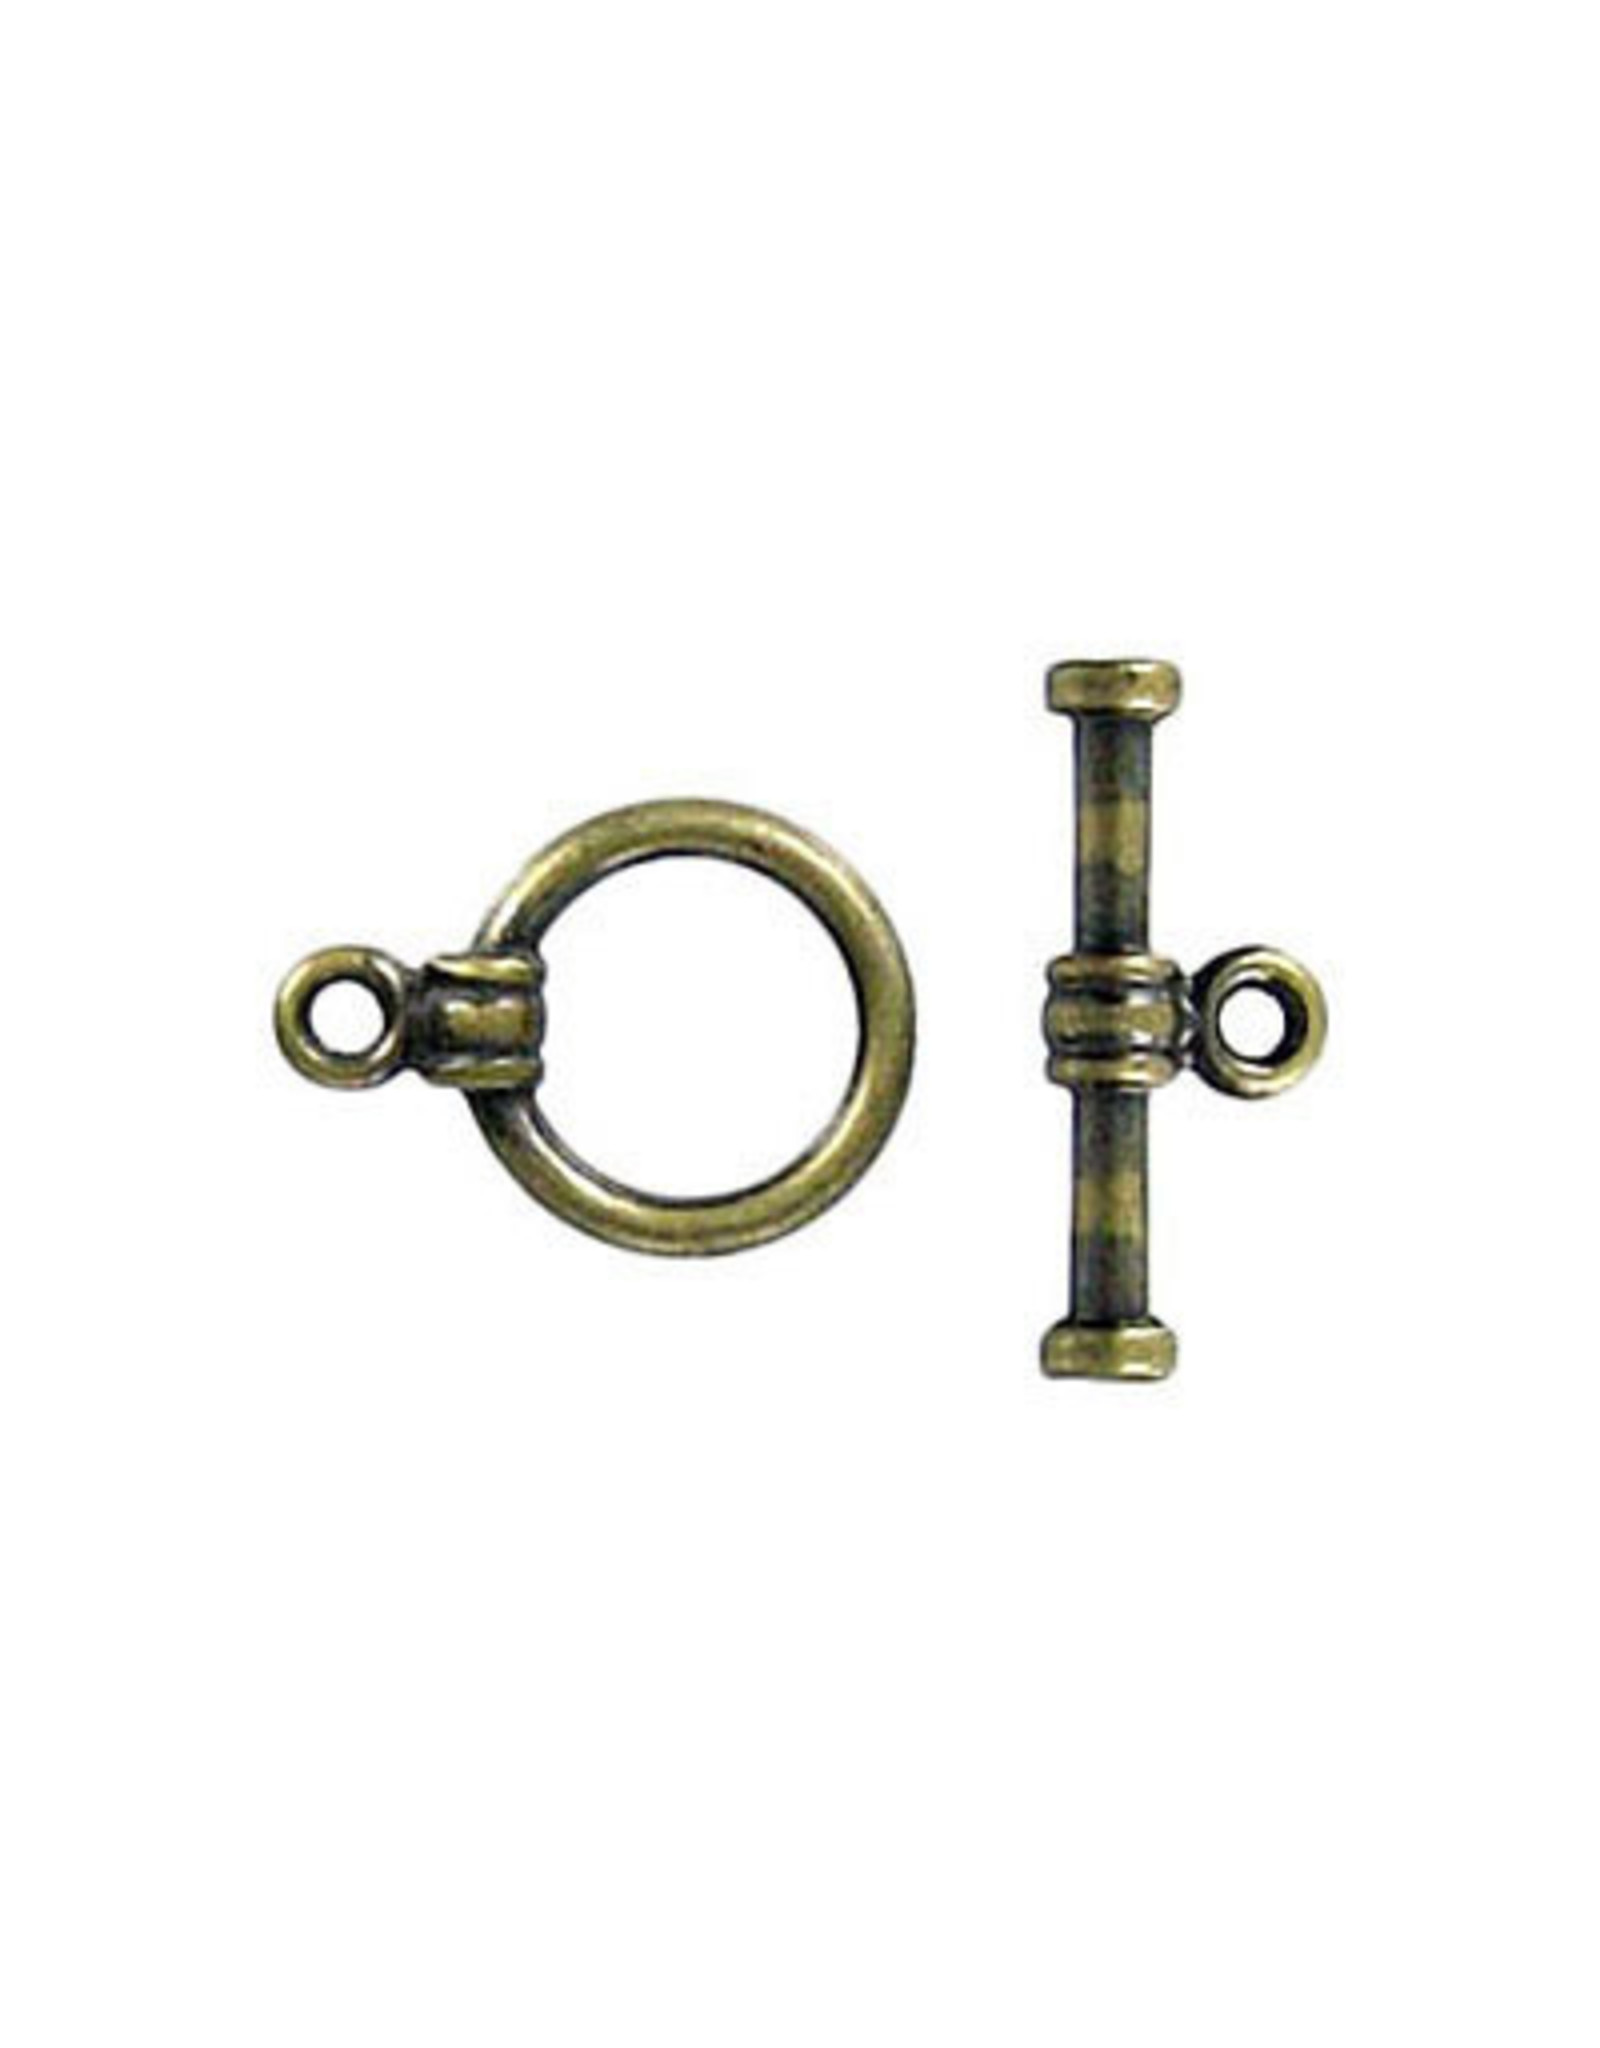 Toggle Clasp Round 10mm Antique Brass  NF  x10